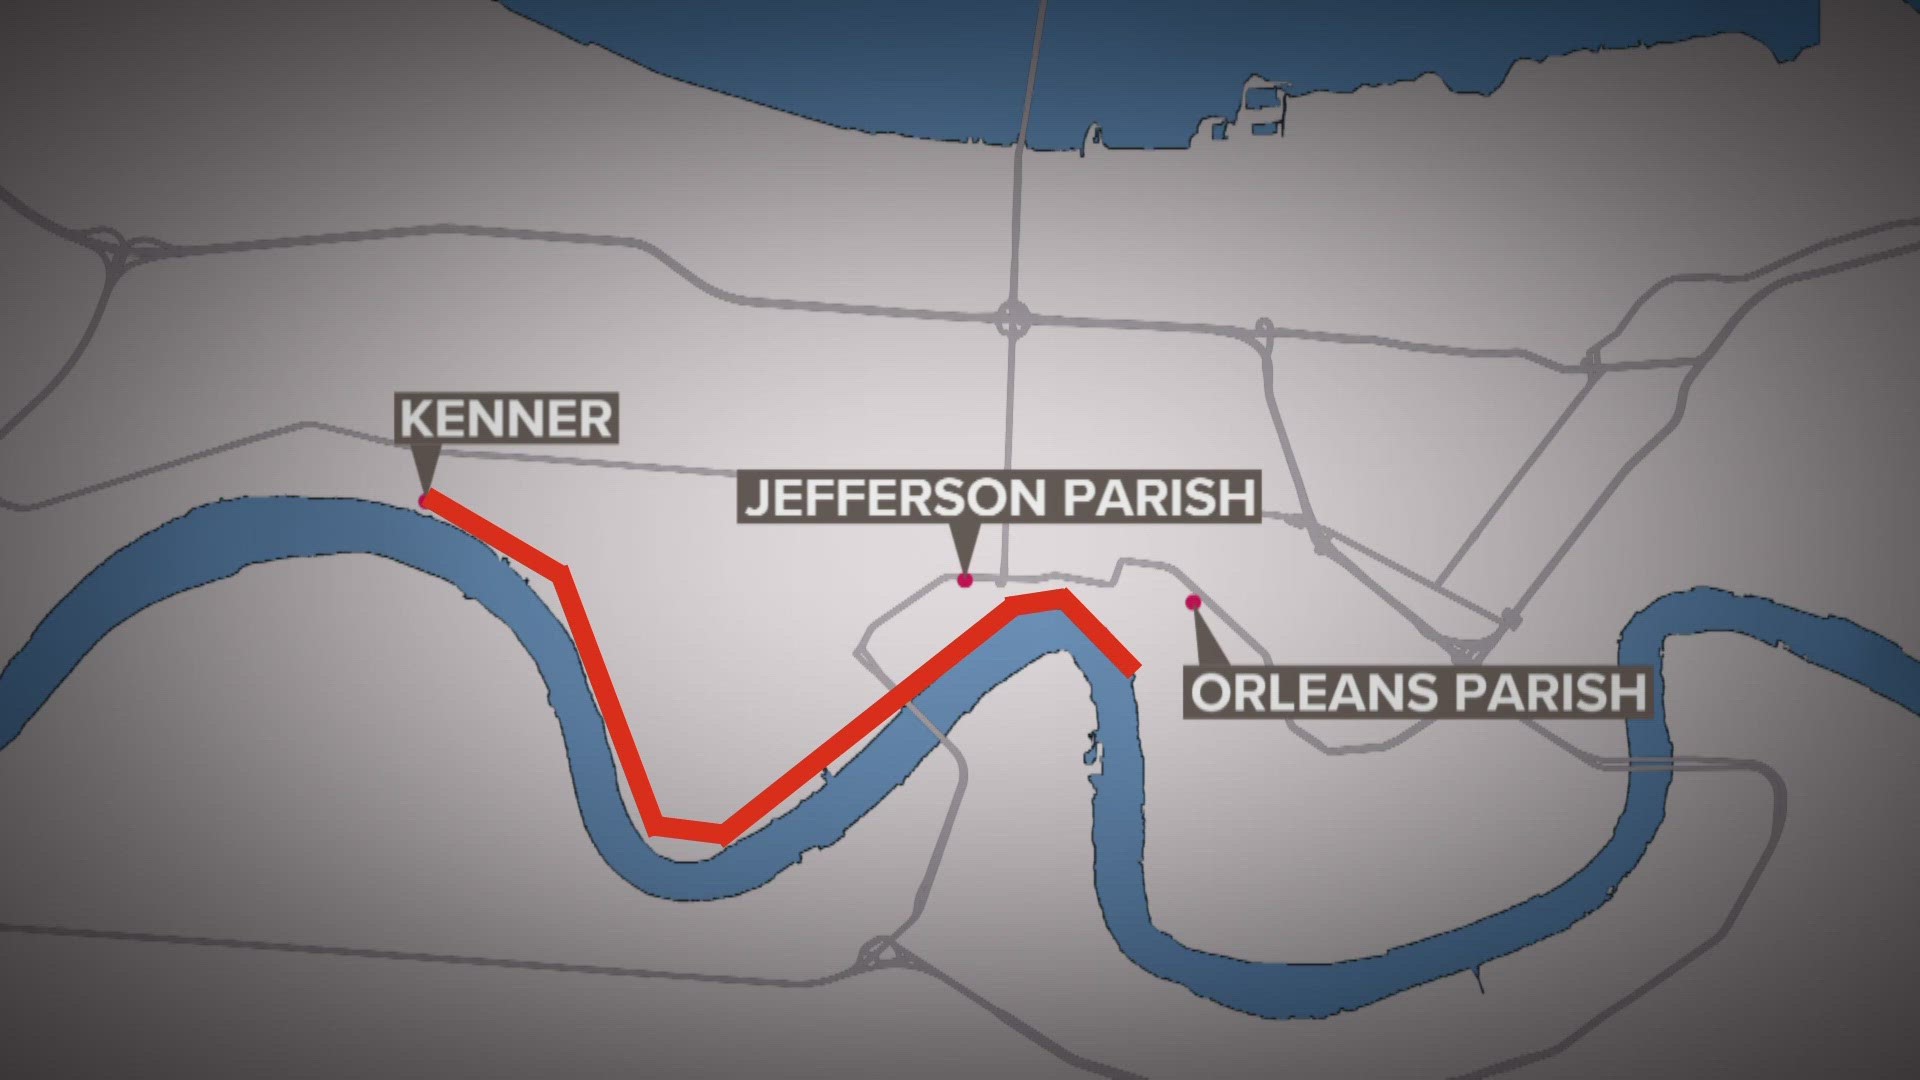 Construction of 10-to 12-mile pipeline could curb saltwater intrusion's impact on New Orleans, WWL Eyewitness News with the latest on the encroaching saltwater wedge